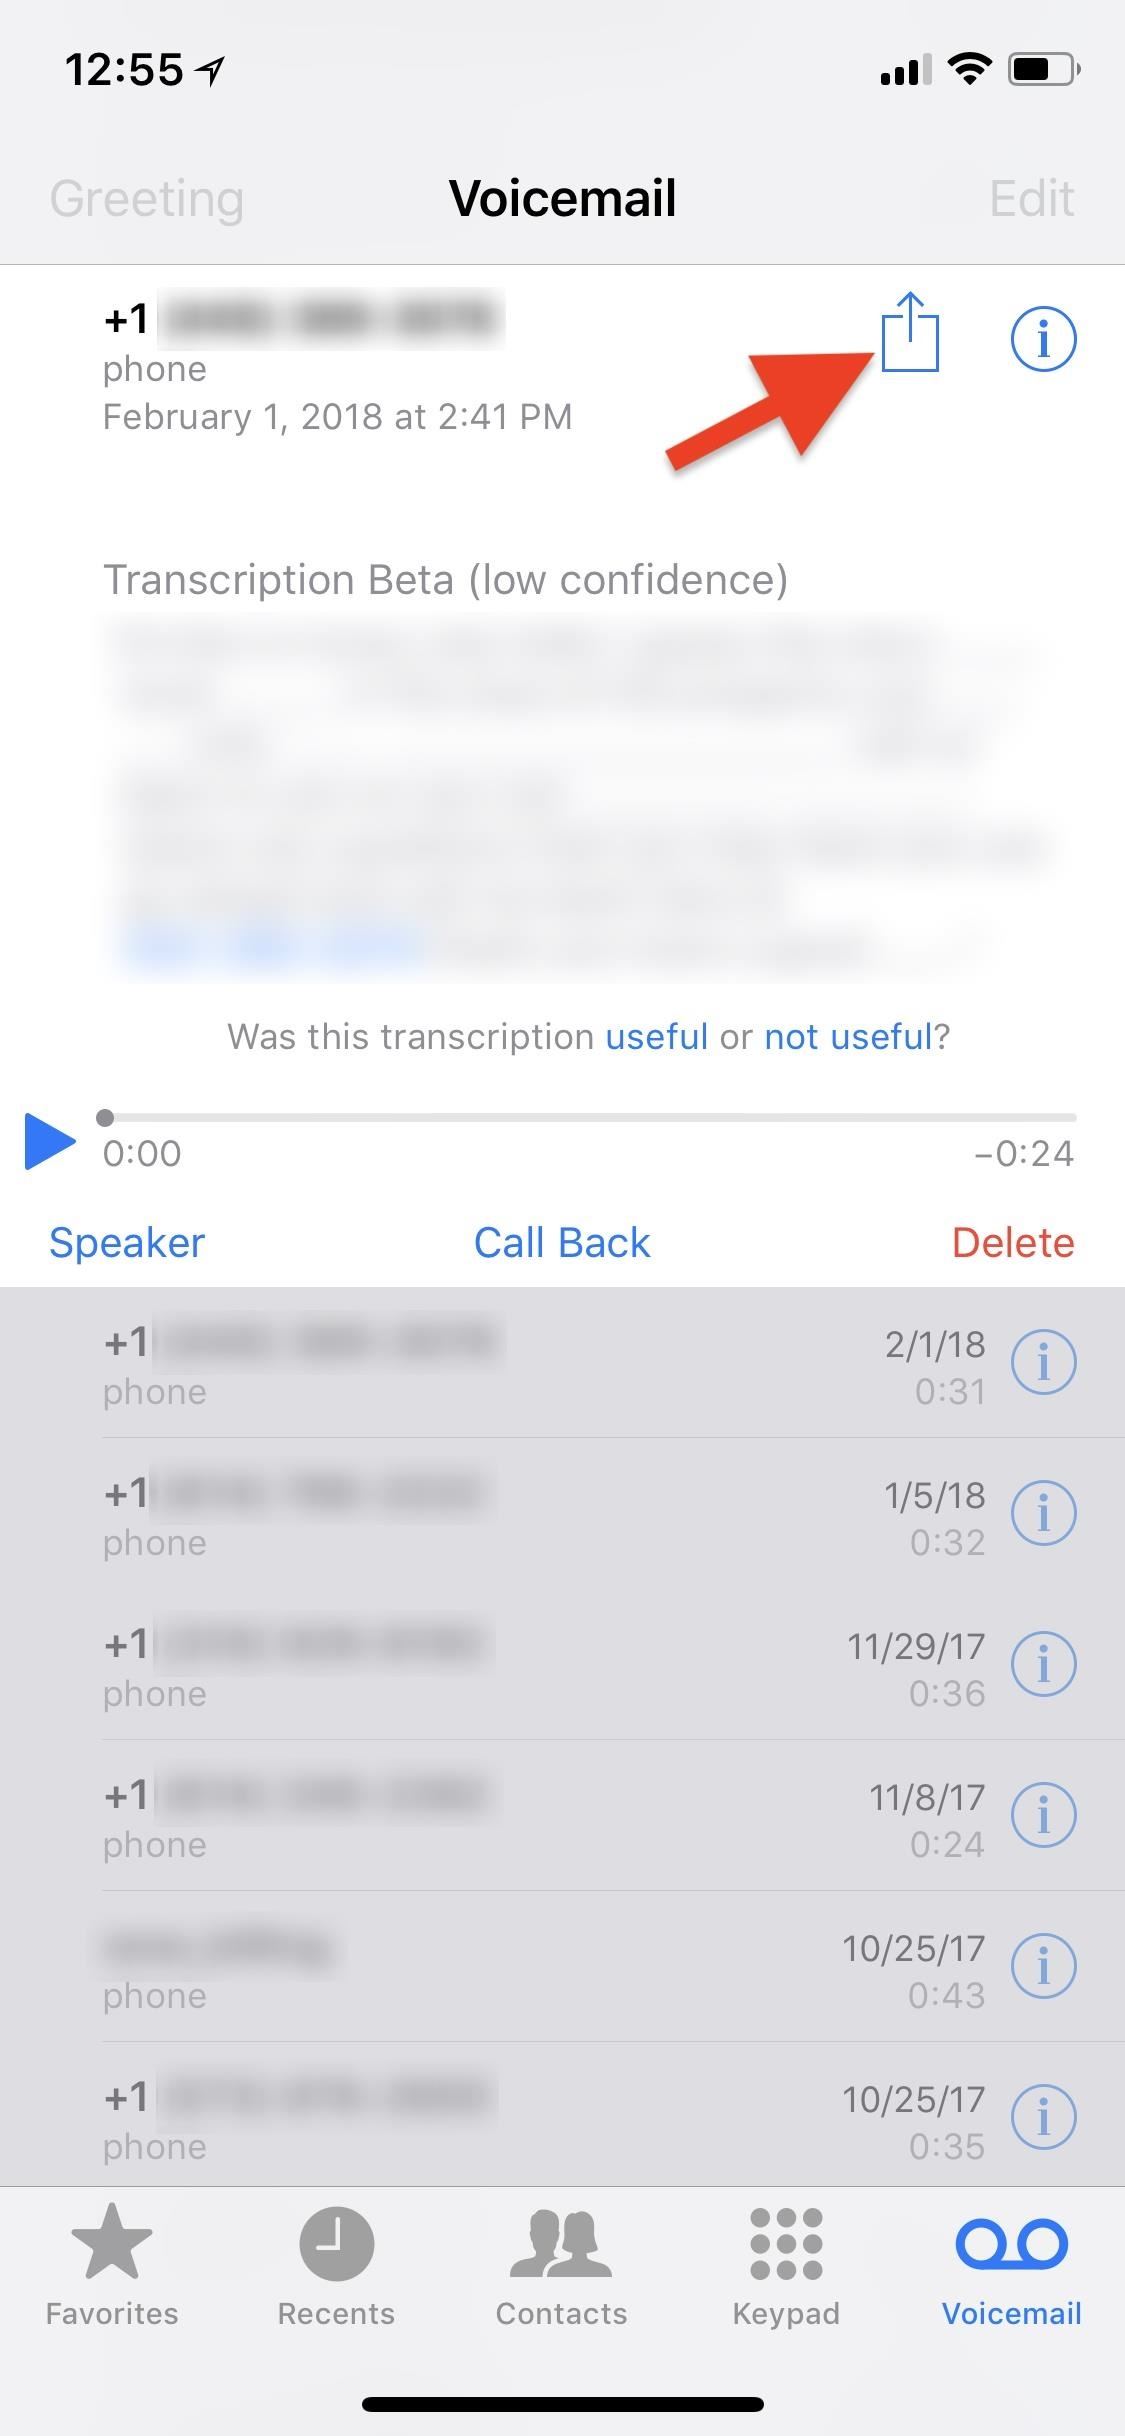 How to Share, Forward & Save Voicemails on Your iPhone